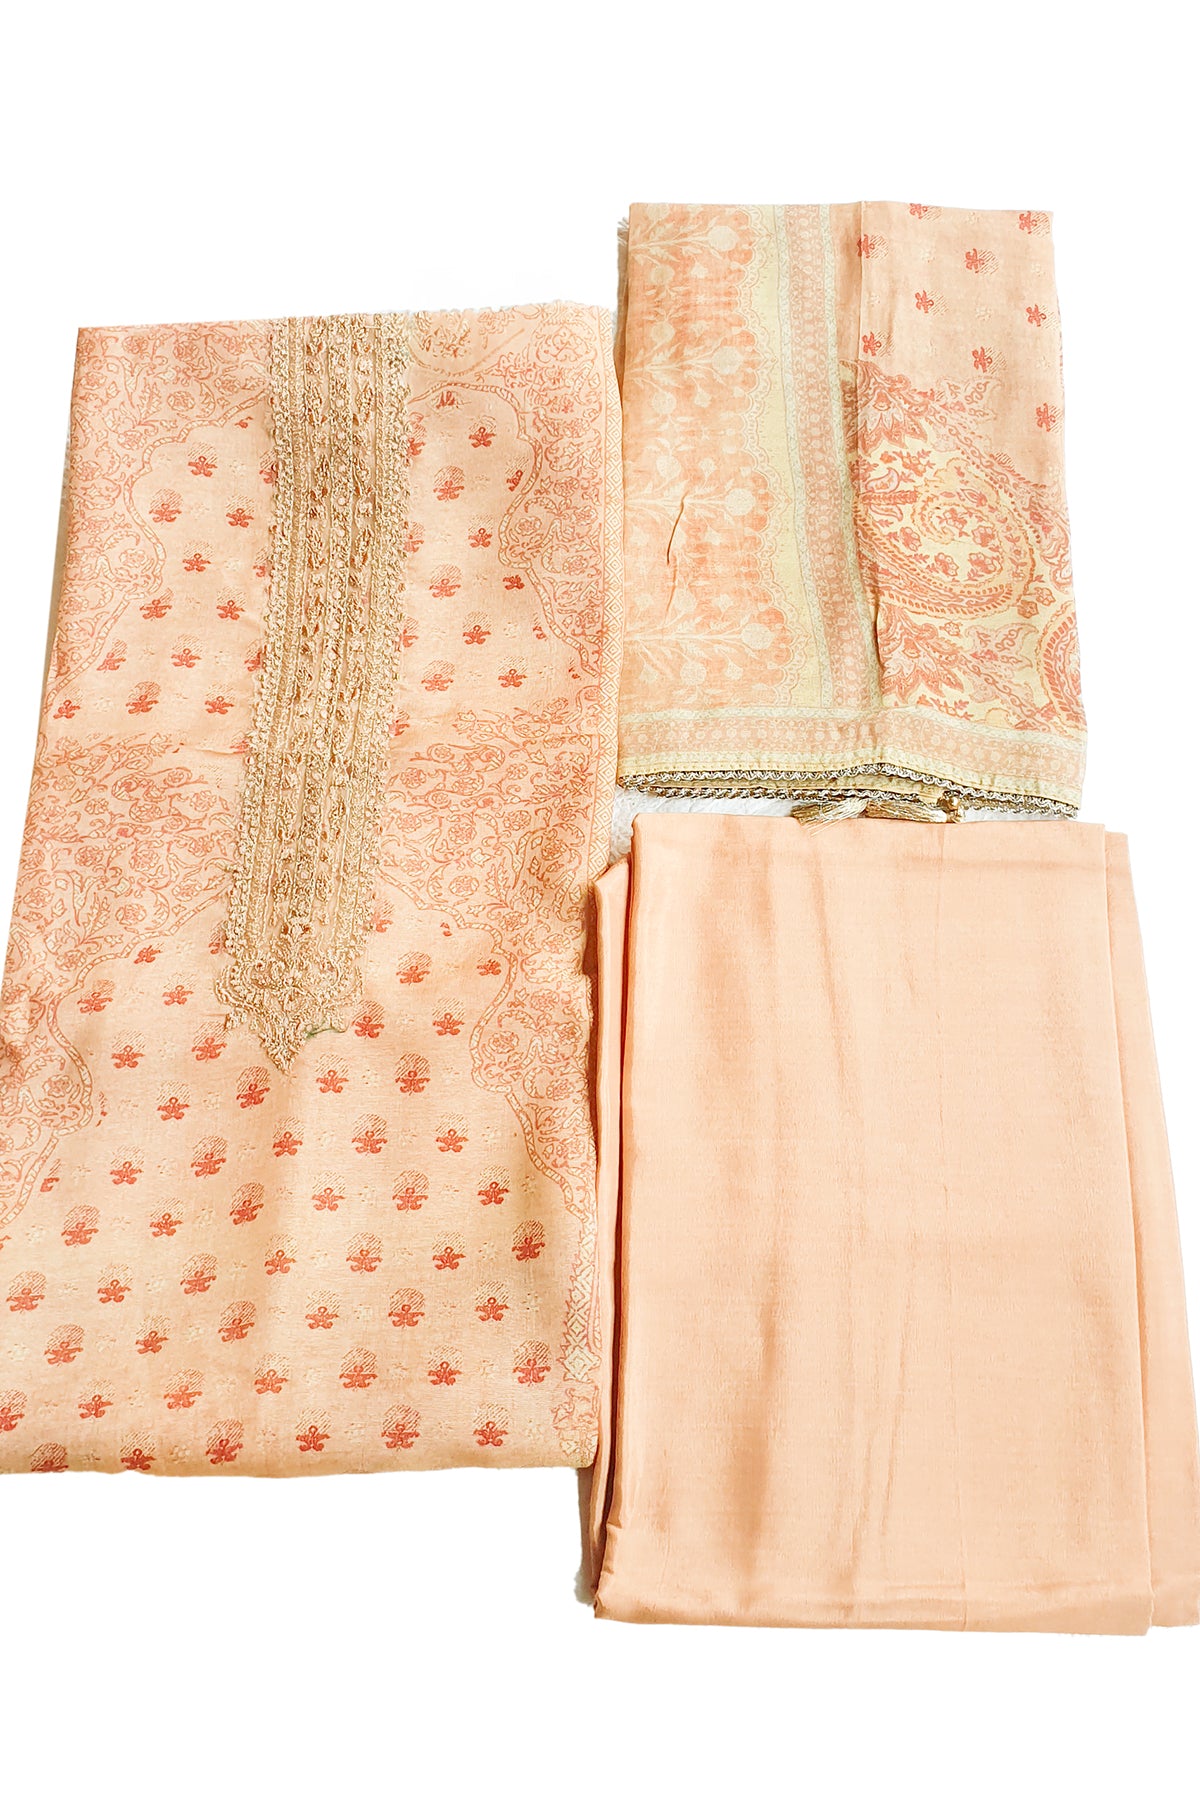 Peach Tissue Printed Lace Embroidered Unstitched Suit